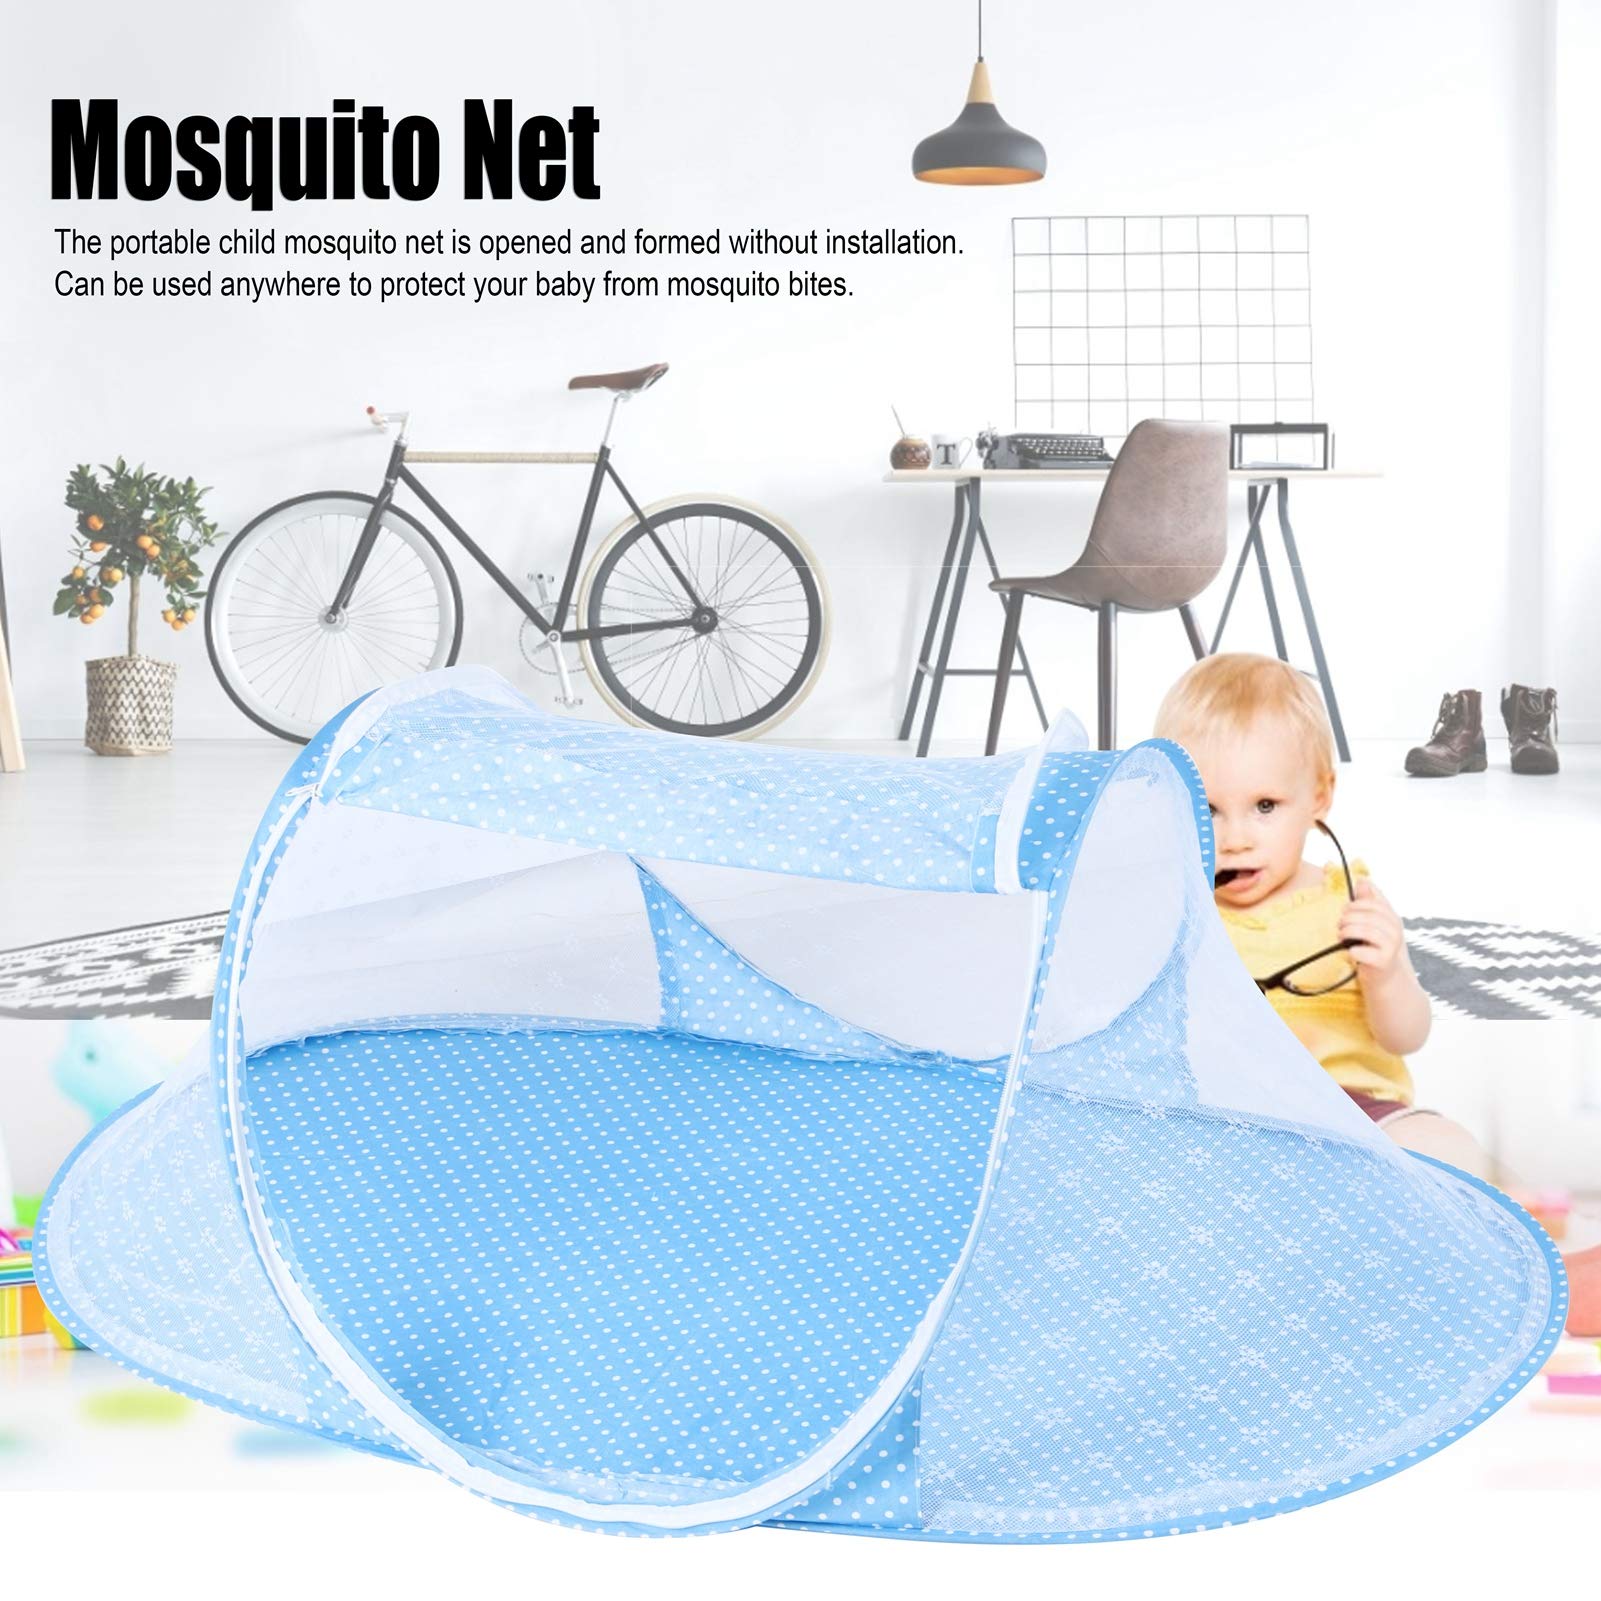 Crib Netting,Baby Bedding Portable Baby Mosquito Net ,Insect Screen, Ultralight, Folding Design for Dining Tables for Children Summer Supplies, Mosquito Net Crib Netting Kid Folding Baby Bedding